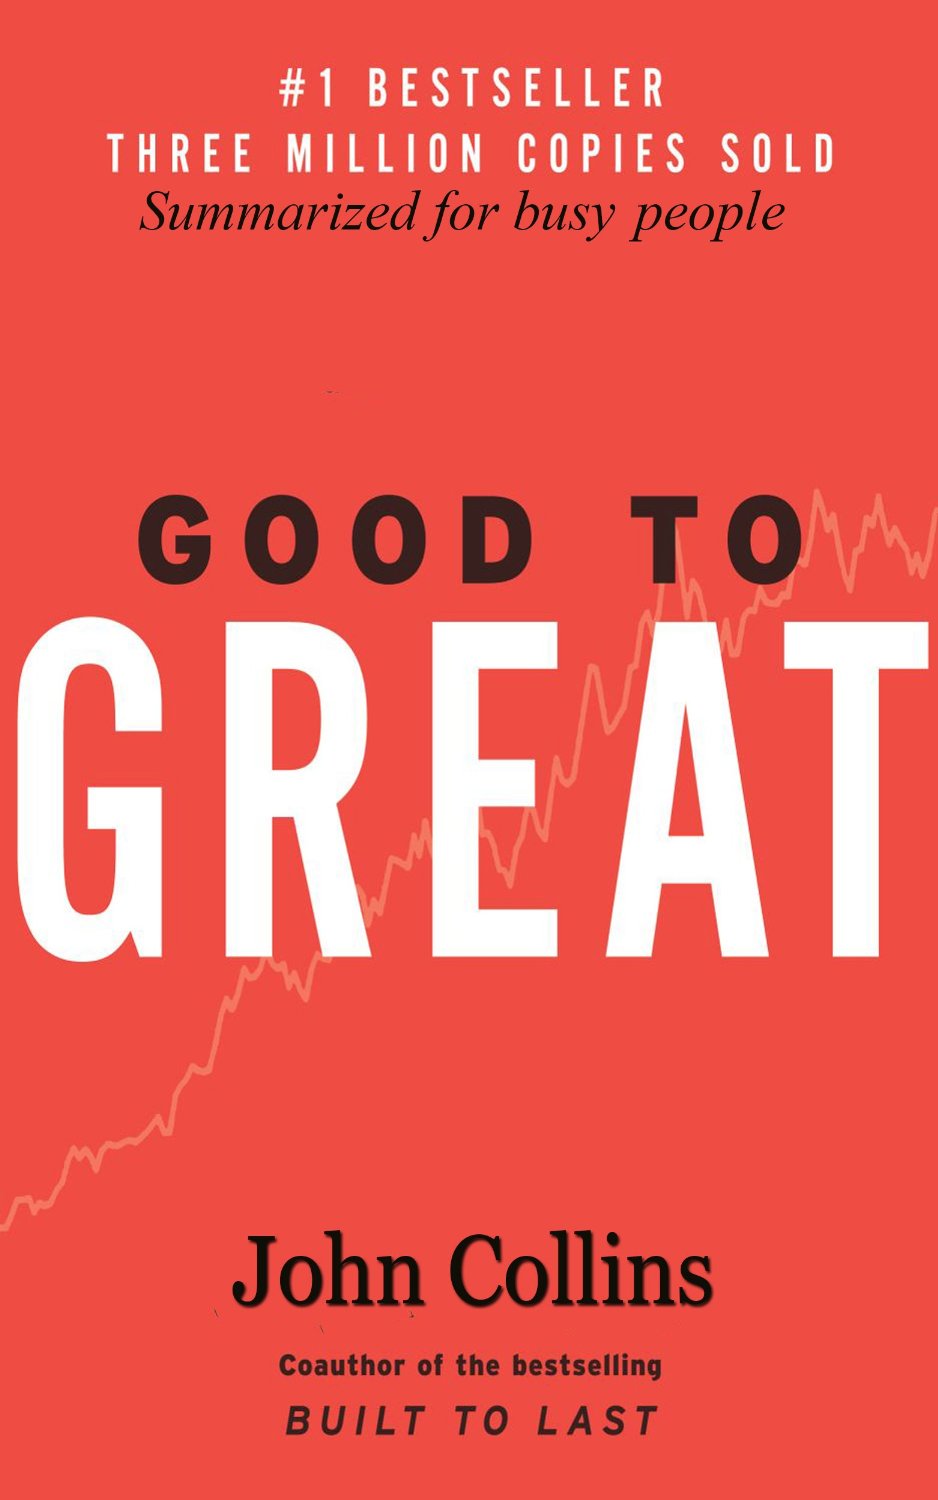 FREE: Good to Great: Summarized for Busy People by John Collins